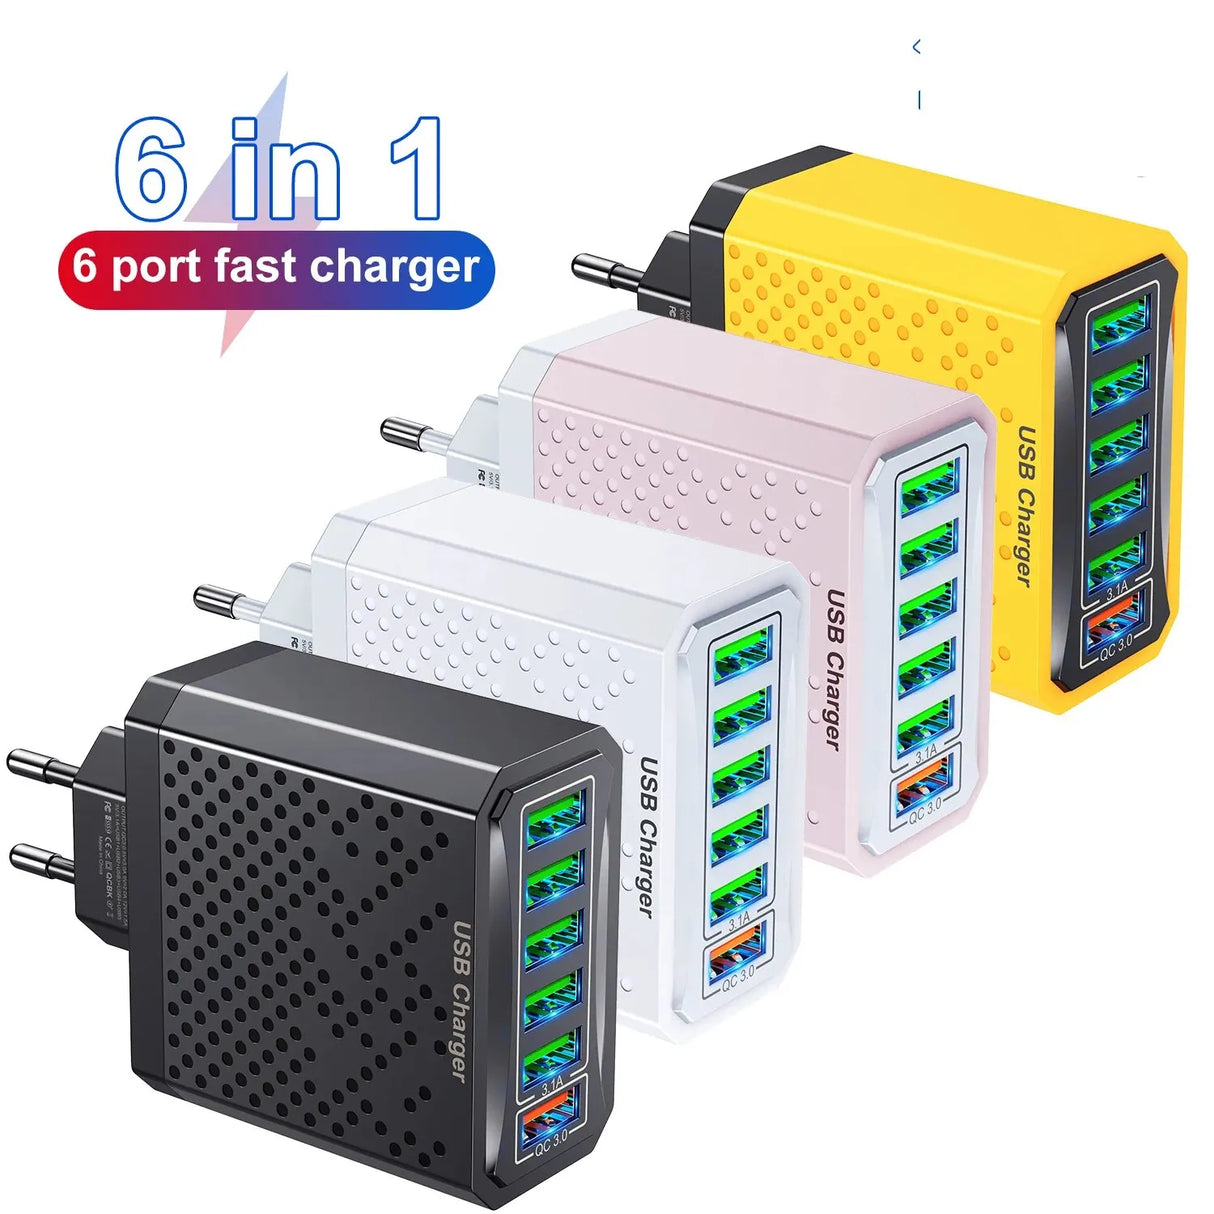 6-In-1 Quick Charge USB Charger with International Plug Options